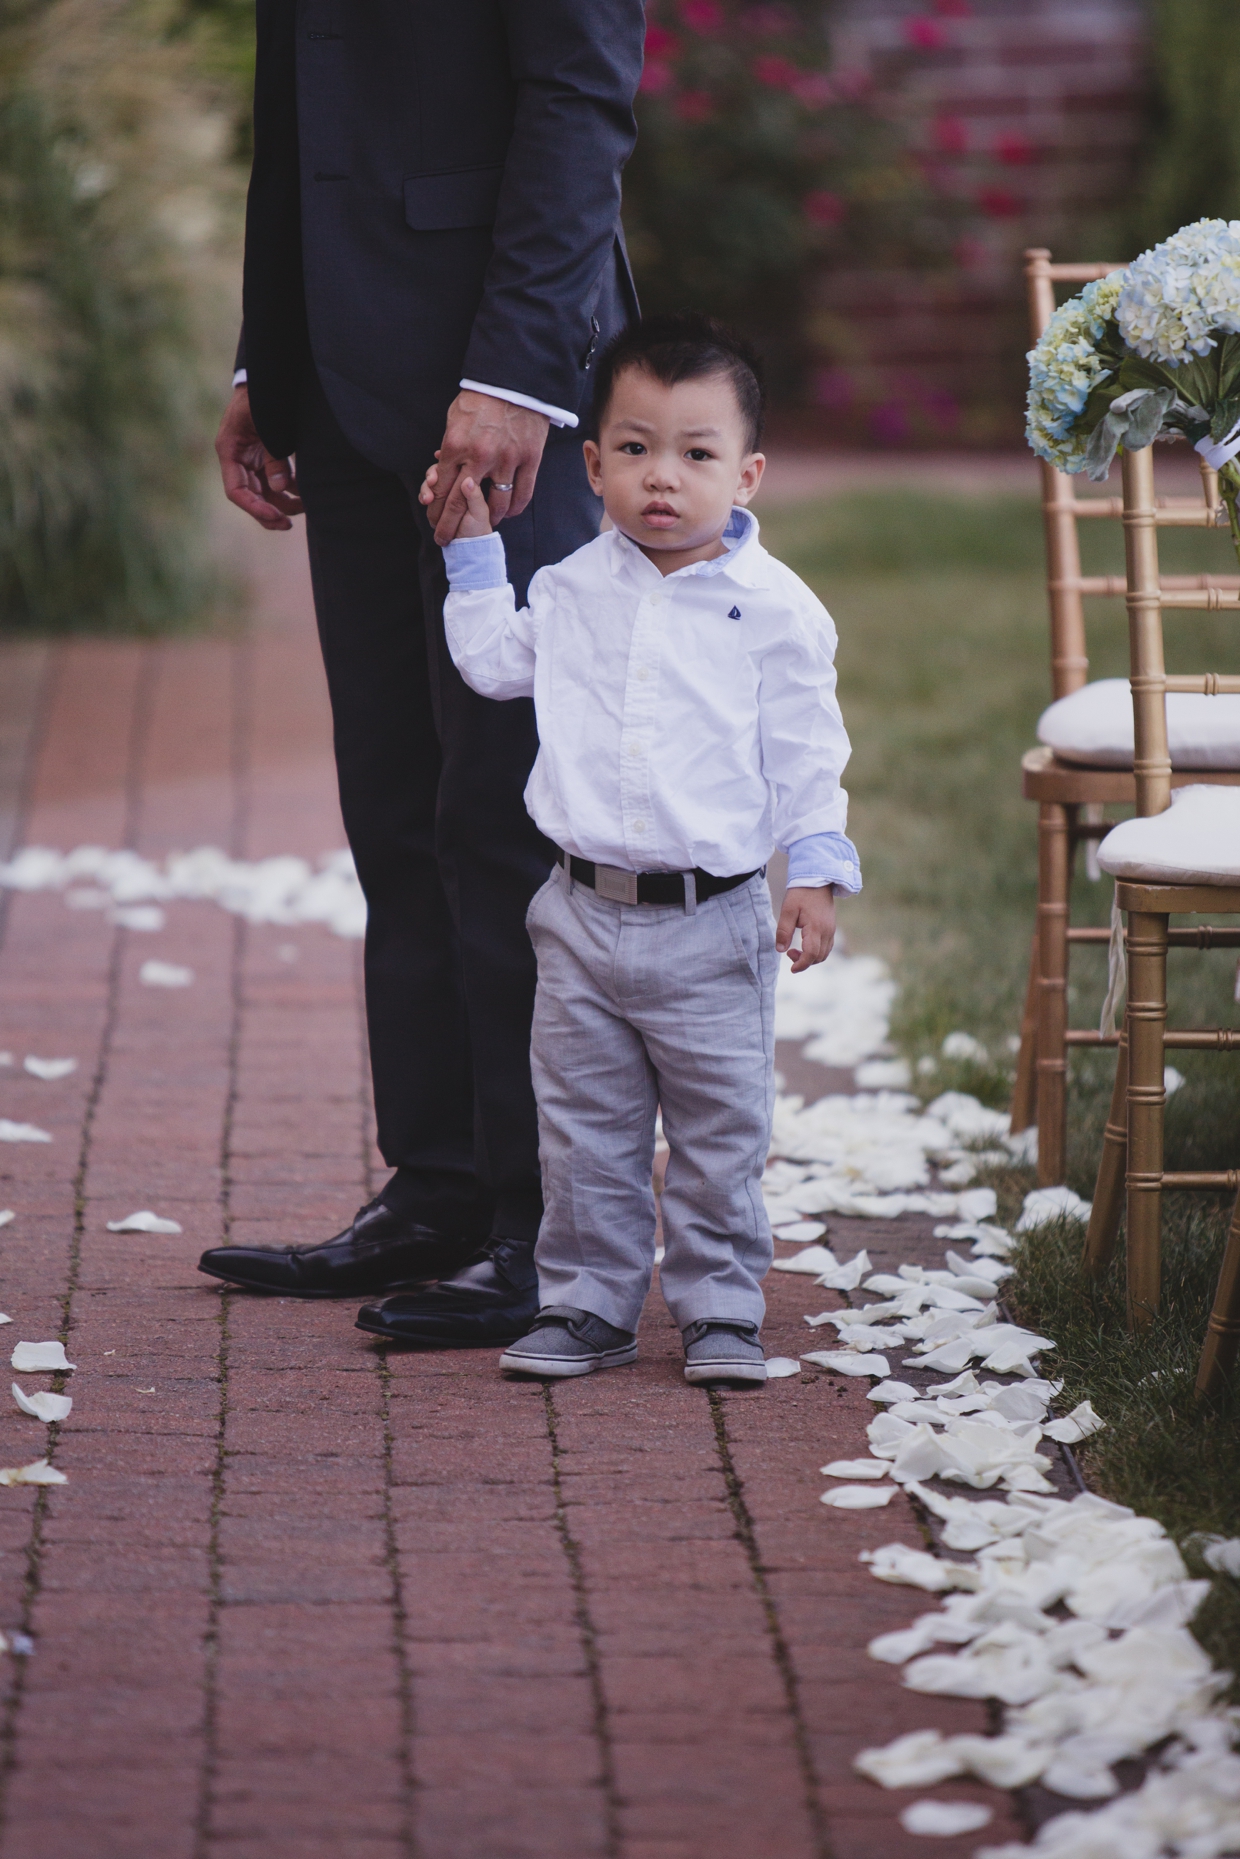 A candid photograph of a ring bearer holding his father's hand before a wedding ceremony at the Boston Marriott Hotel